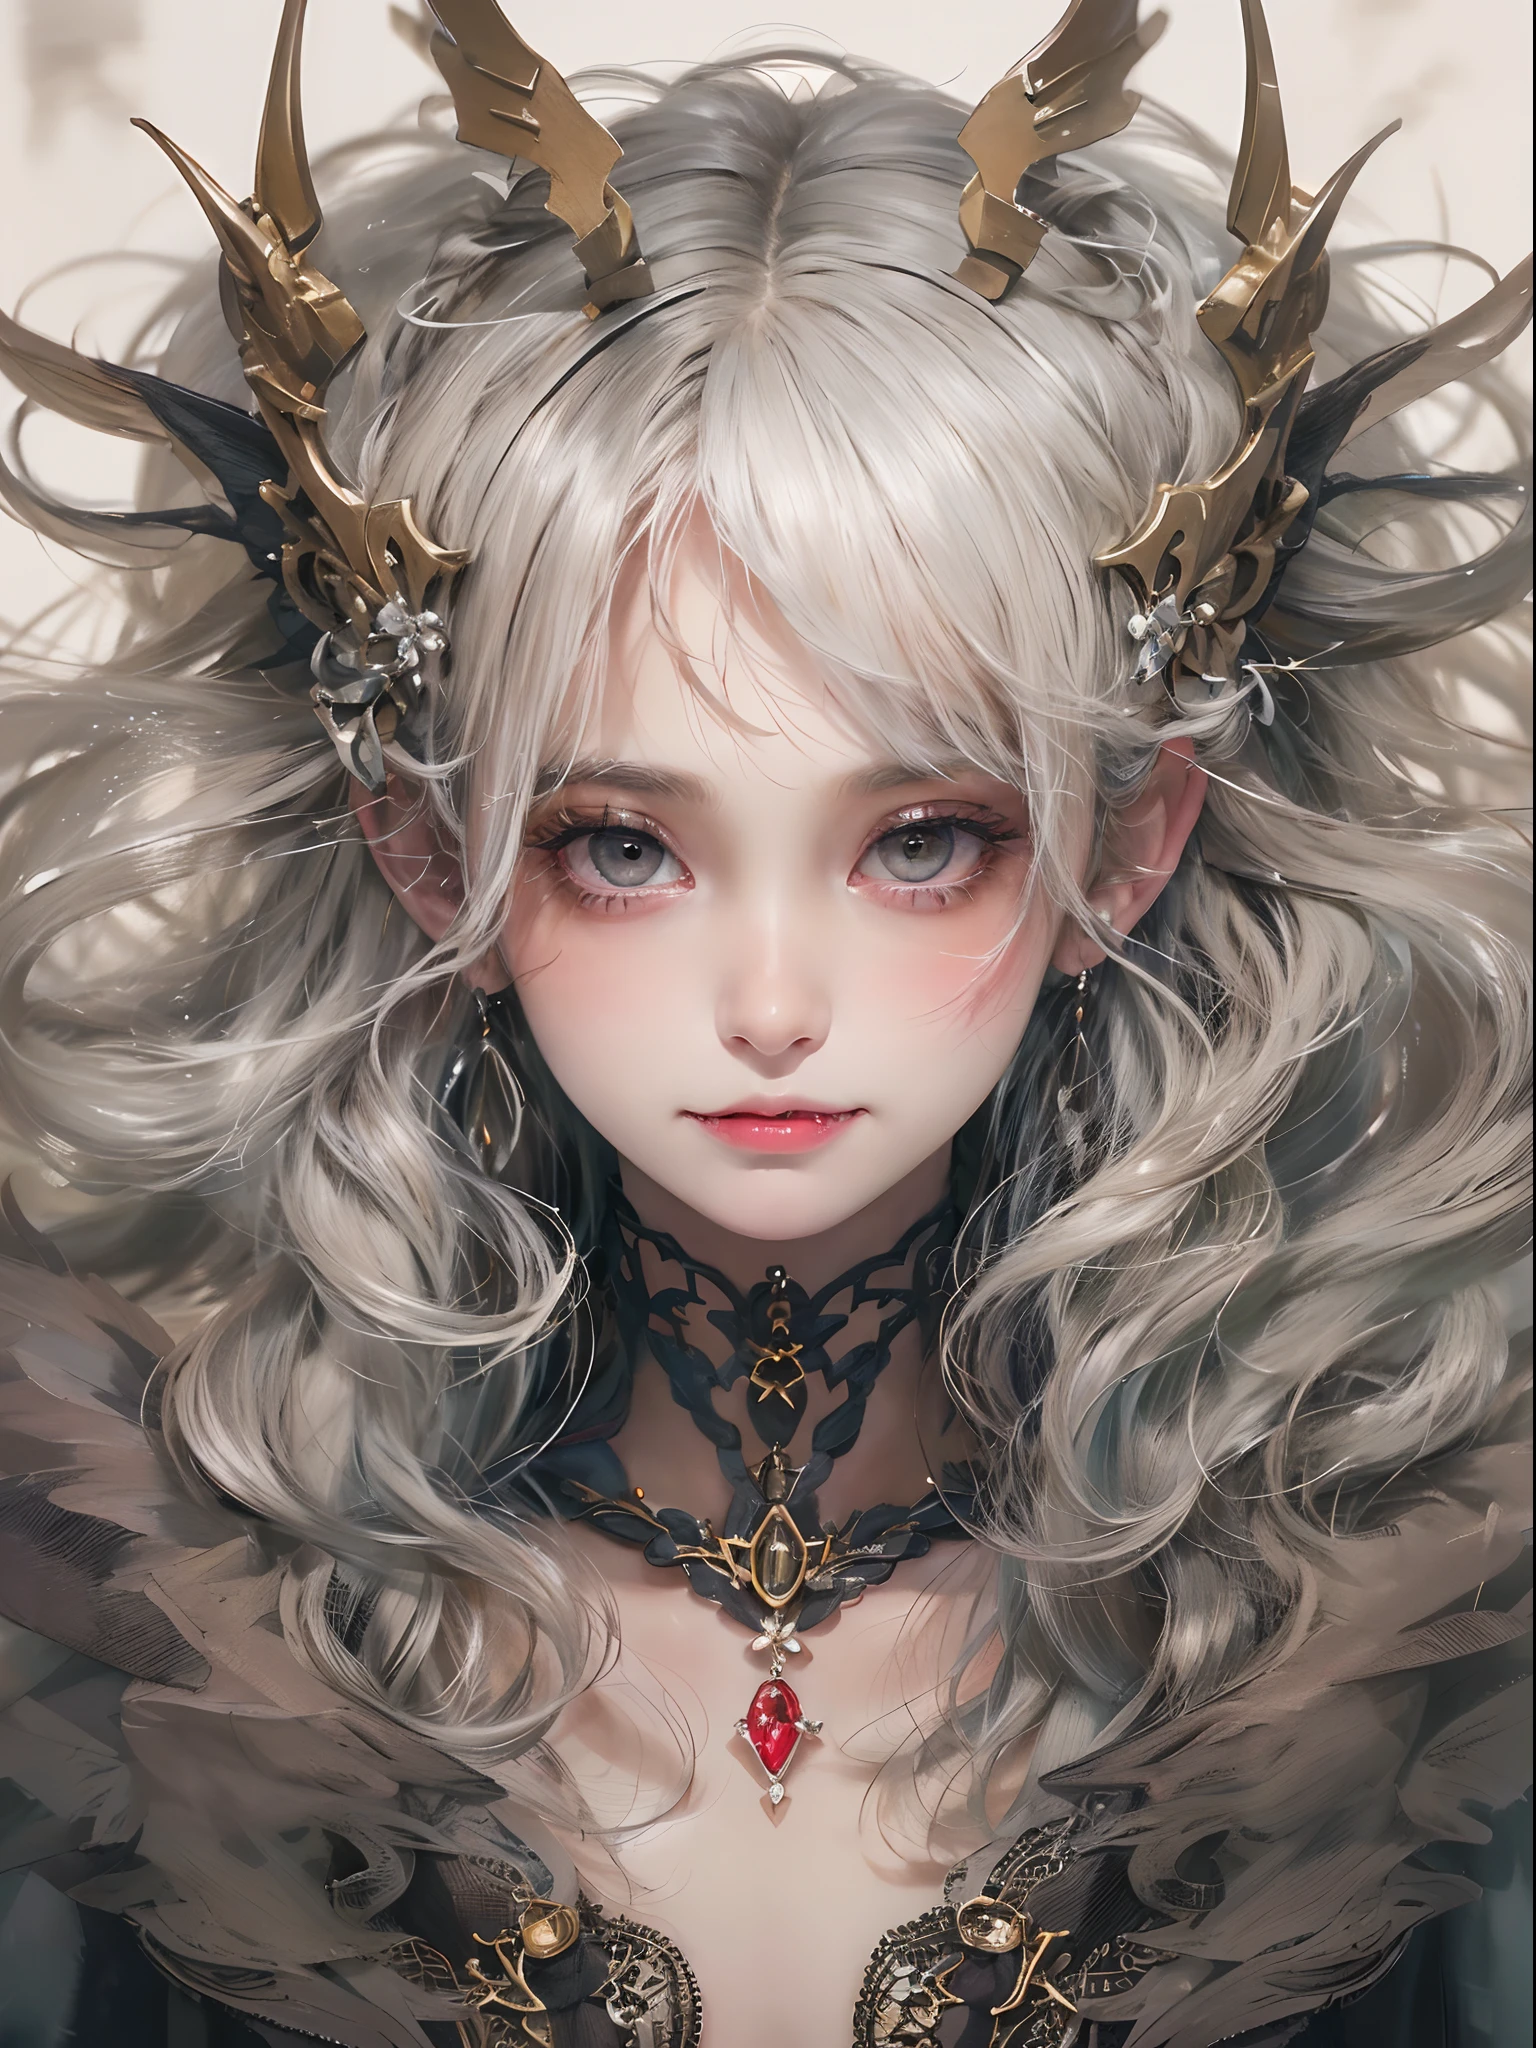 (watercolor:1.2),(incredible detail, textures and maximum detail),(dark color concept:2.0), dolly girl, a girl like doll with angel wings, archangel, angel ring, elf ear with many earings, facing the front, nearly naked, thin body, skinny, small breasts, tiny , princess crown, dragon horn, looking up at camera, (no hands),(Highest quality authentic textured skin),(Faint sunshine),(catch light:1.5),(abyssal),(Fine, Round, Symmetrical eyes),Delicate facial features,(Burning bright and cold eyes), very slim and thin body, naked, nude, (She has a sadly smile on her face),(Her face is gentle and beautiful),Glass earrings on the ears,,(Blonde hair),(silvery white hair),(Dramatic photo:1.4),(dramatic pose),(flamboyant photo), upturned eyes, upward glance, A messy painting，(Hair flows in air:2.0),(Vortices and tidal currents in the background),(Dramaticlight),(Magnificent scene),(Surrounded by beautiful feathers),Epic realism,Cinematic feeling,(high-density imaging review:1.5),Ultra detailed,Dramaticlight,(intricately details:1.1), complex background, sparkle background, fractal background,(mighty fangs:1.5),naked,nude,